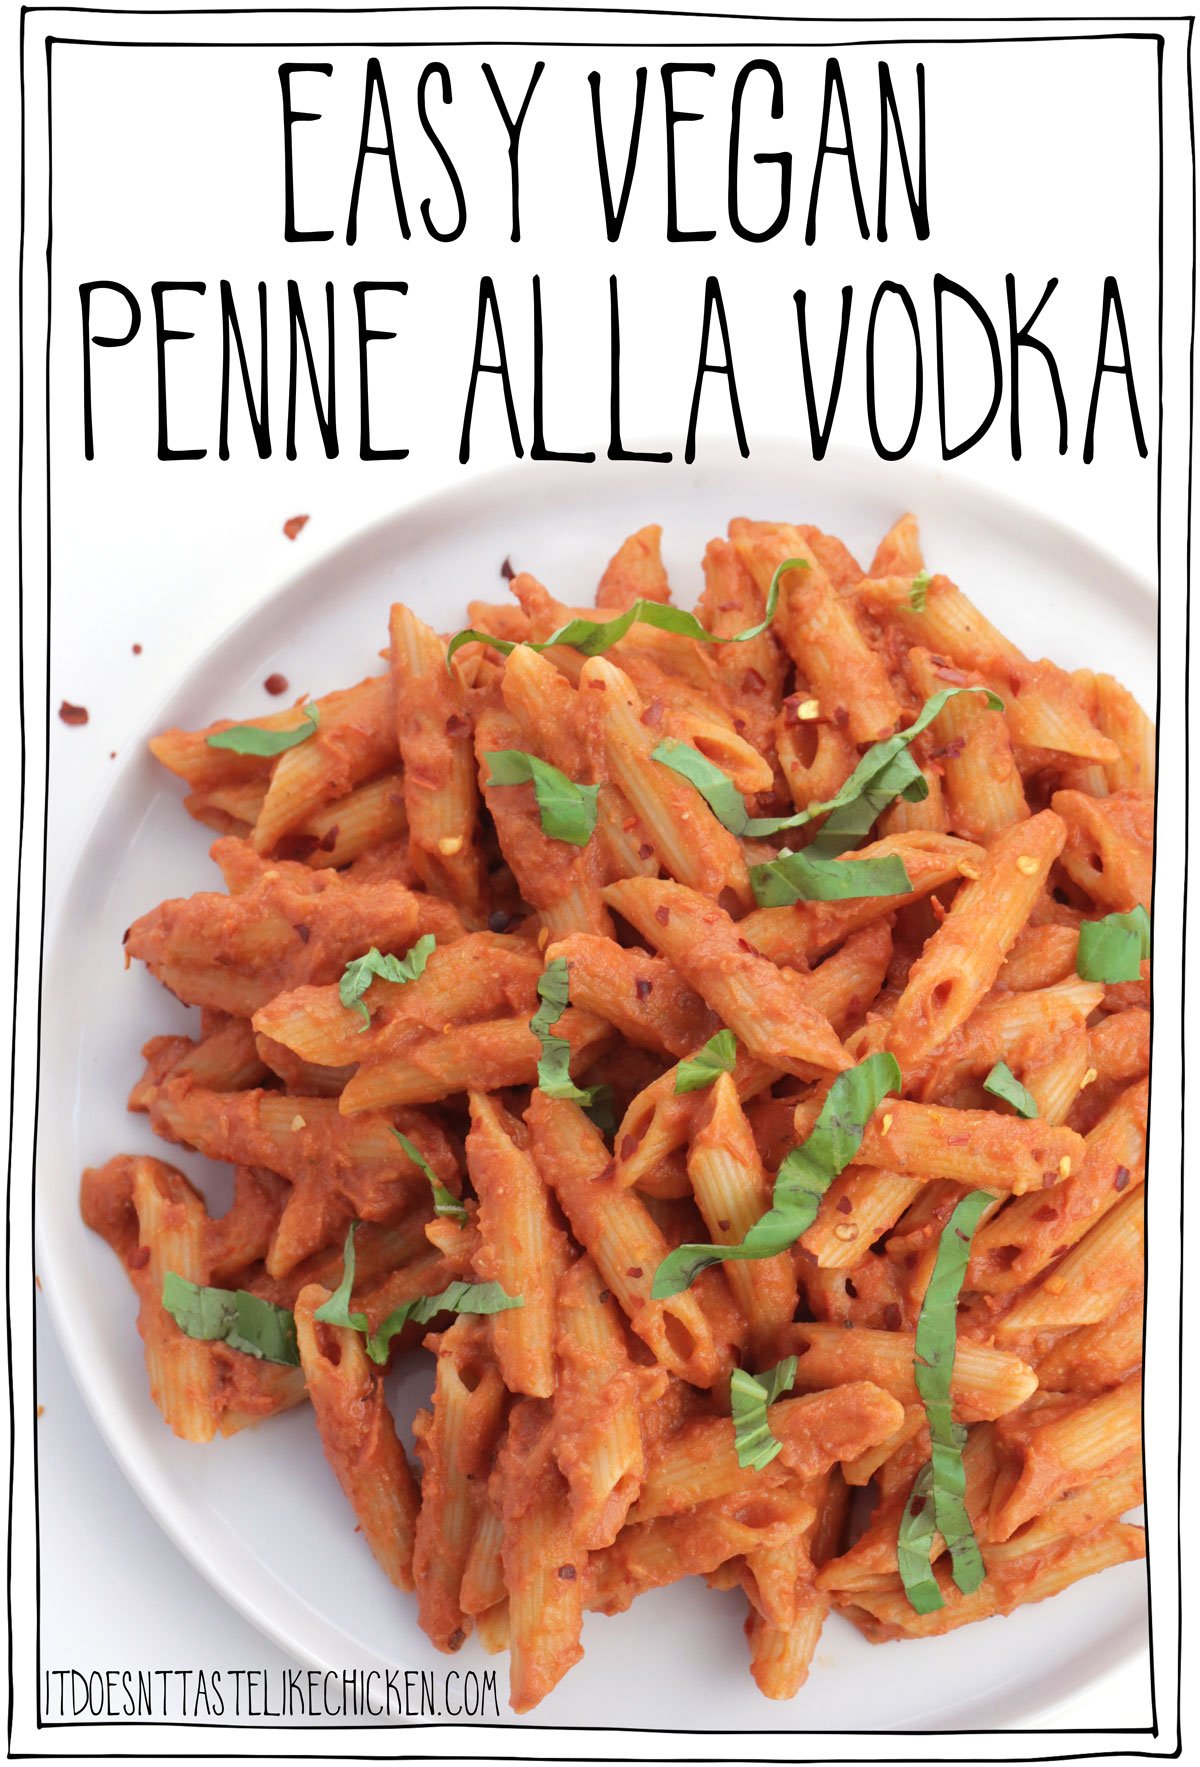 Easy Vegan Penne alla Vodka! Just 20 minutes to prepare, and only 10 ingredients! This pasta is rich, creamy, and oh so delicious. It can be made fresh, or the sauce can be prepared ahead of time and frozen for later. The perfect simple pasta dish for a fancy night in. #itdoesnttastelikechicken #veganrecipes